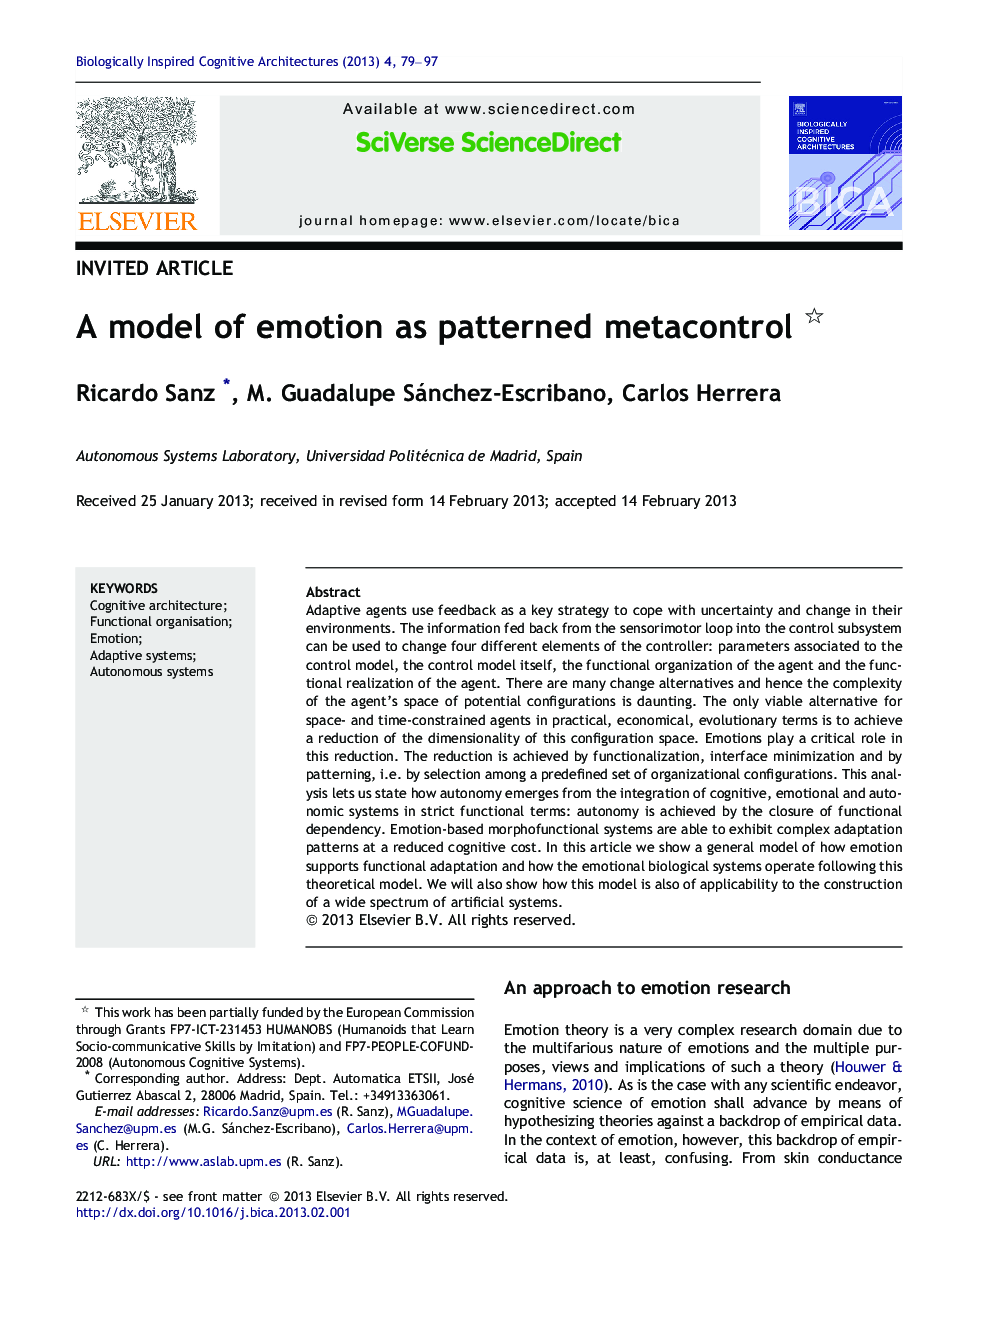 A model of emotion as patterned metacontrol 